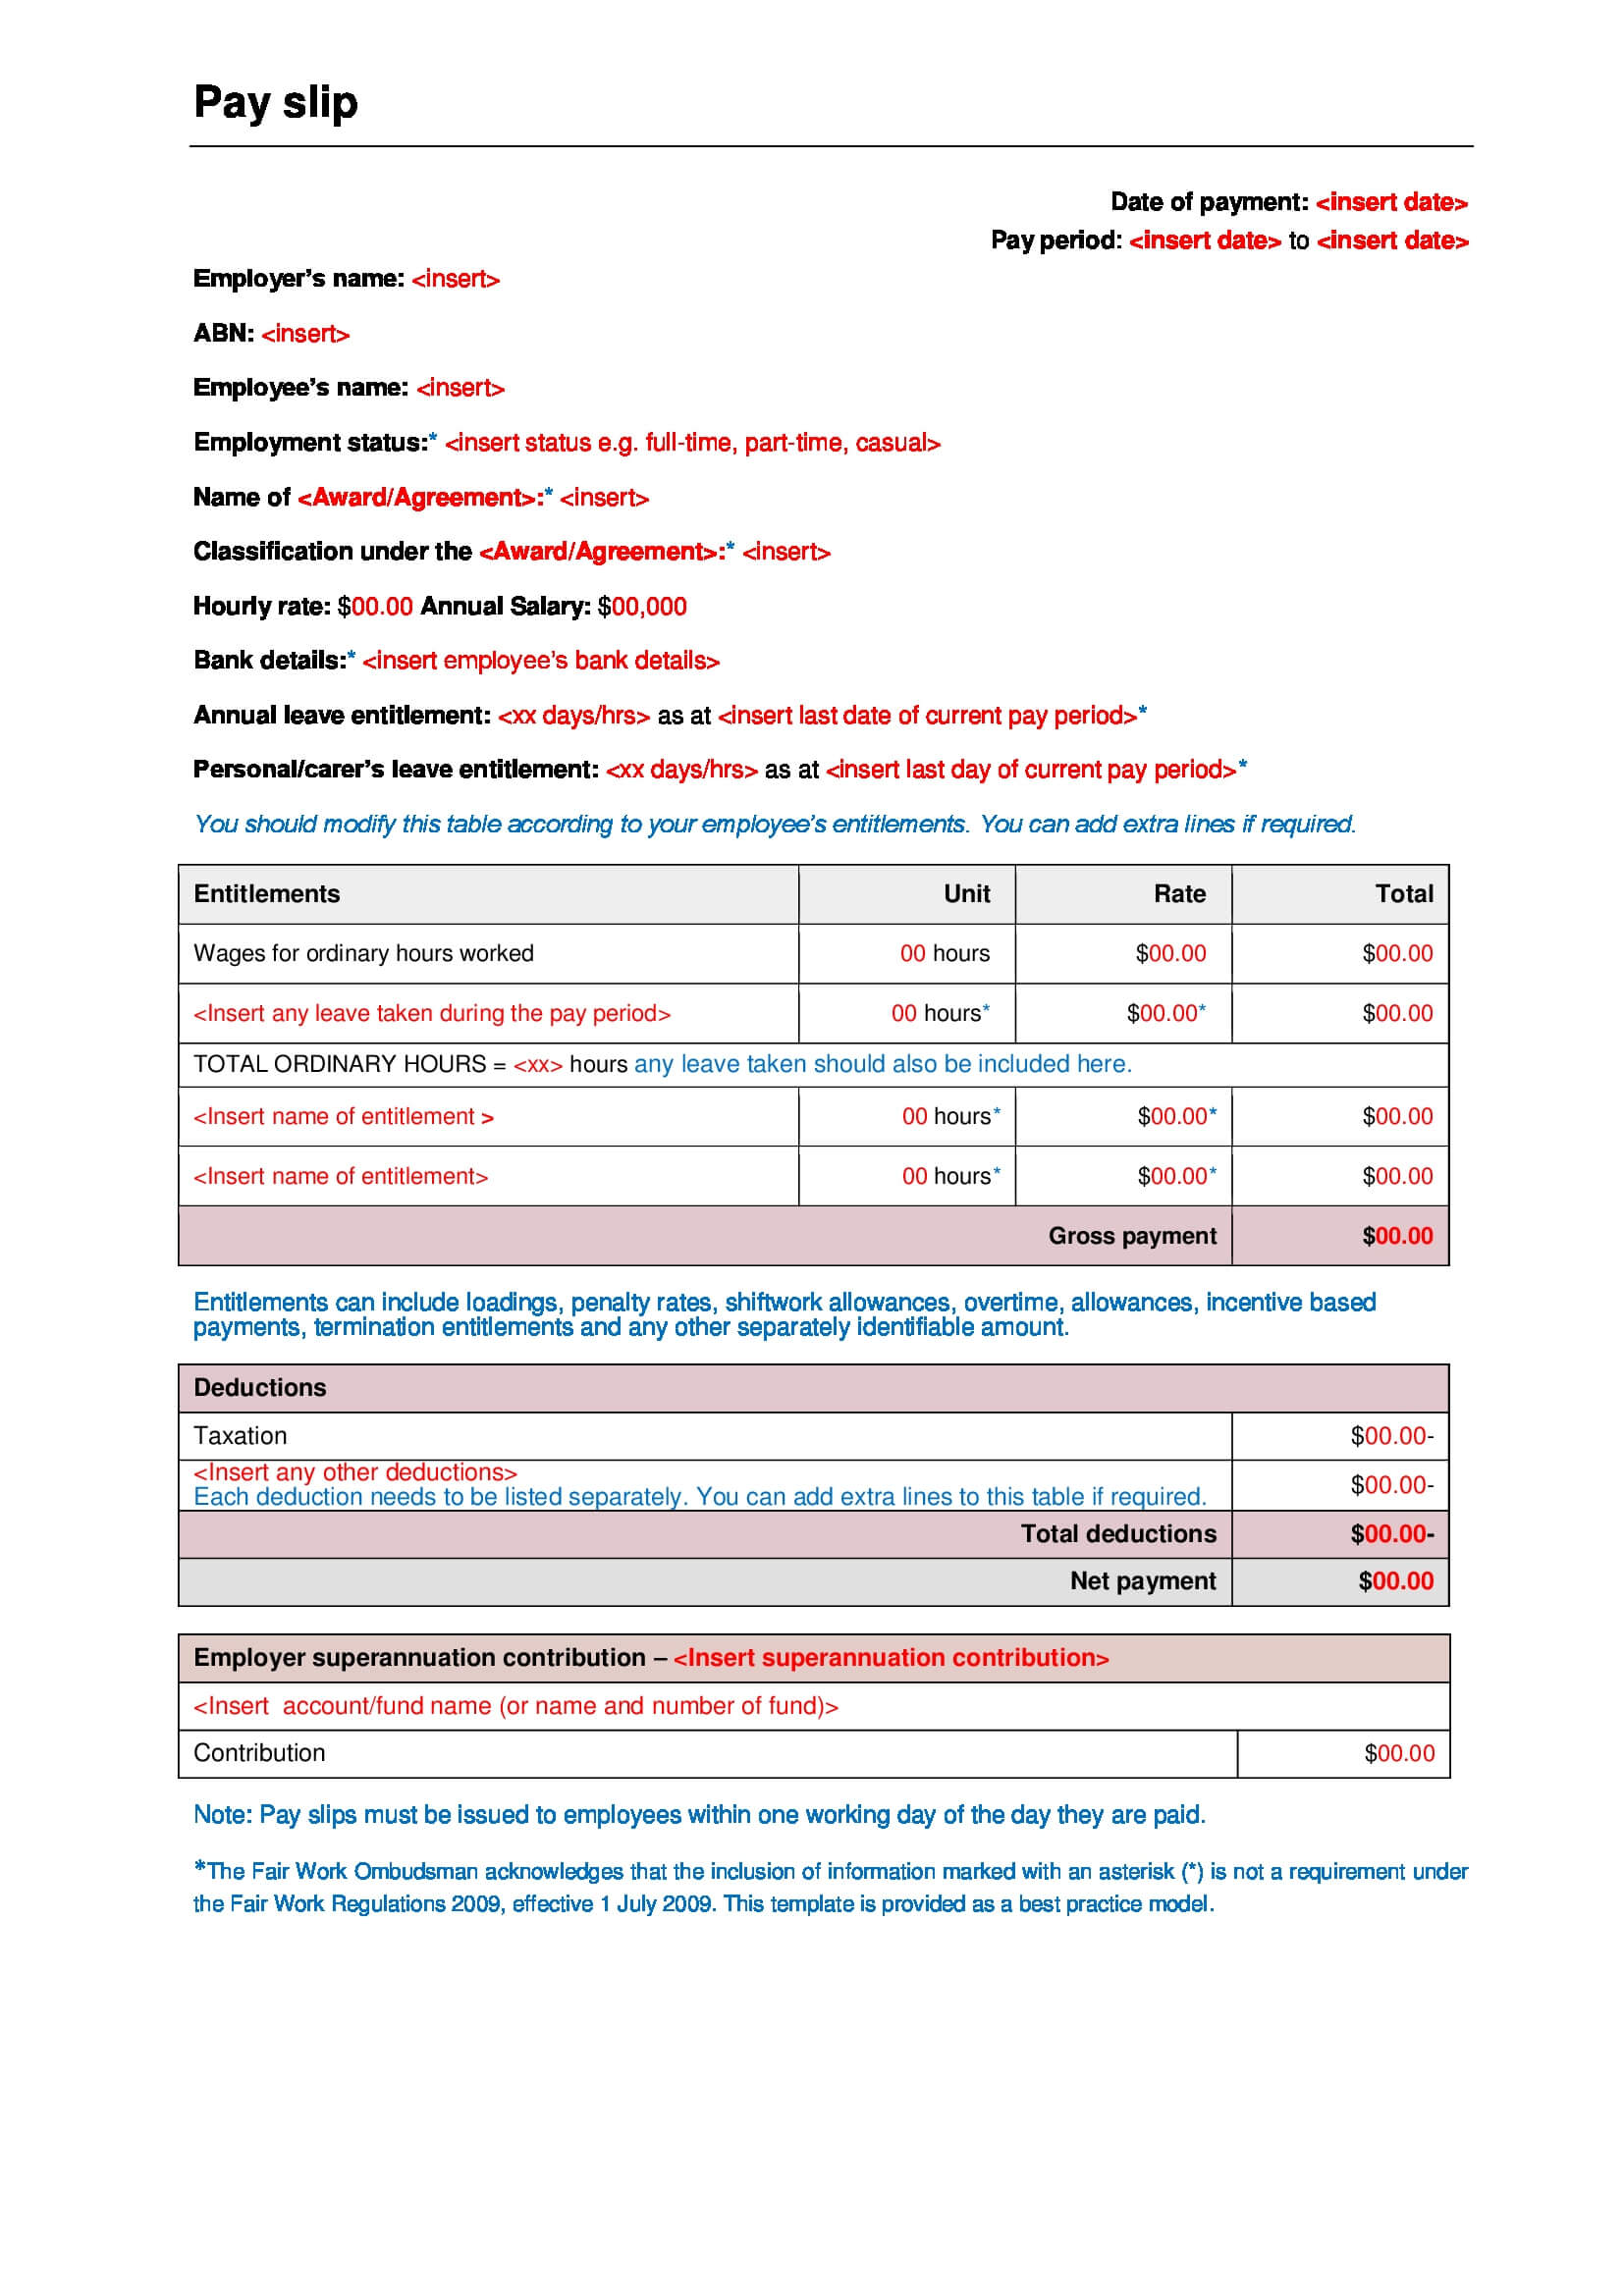 Payslip Templates | 28+ Free Printable Excel & Word Formats Inside Blank Payslip Template